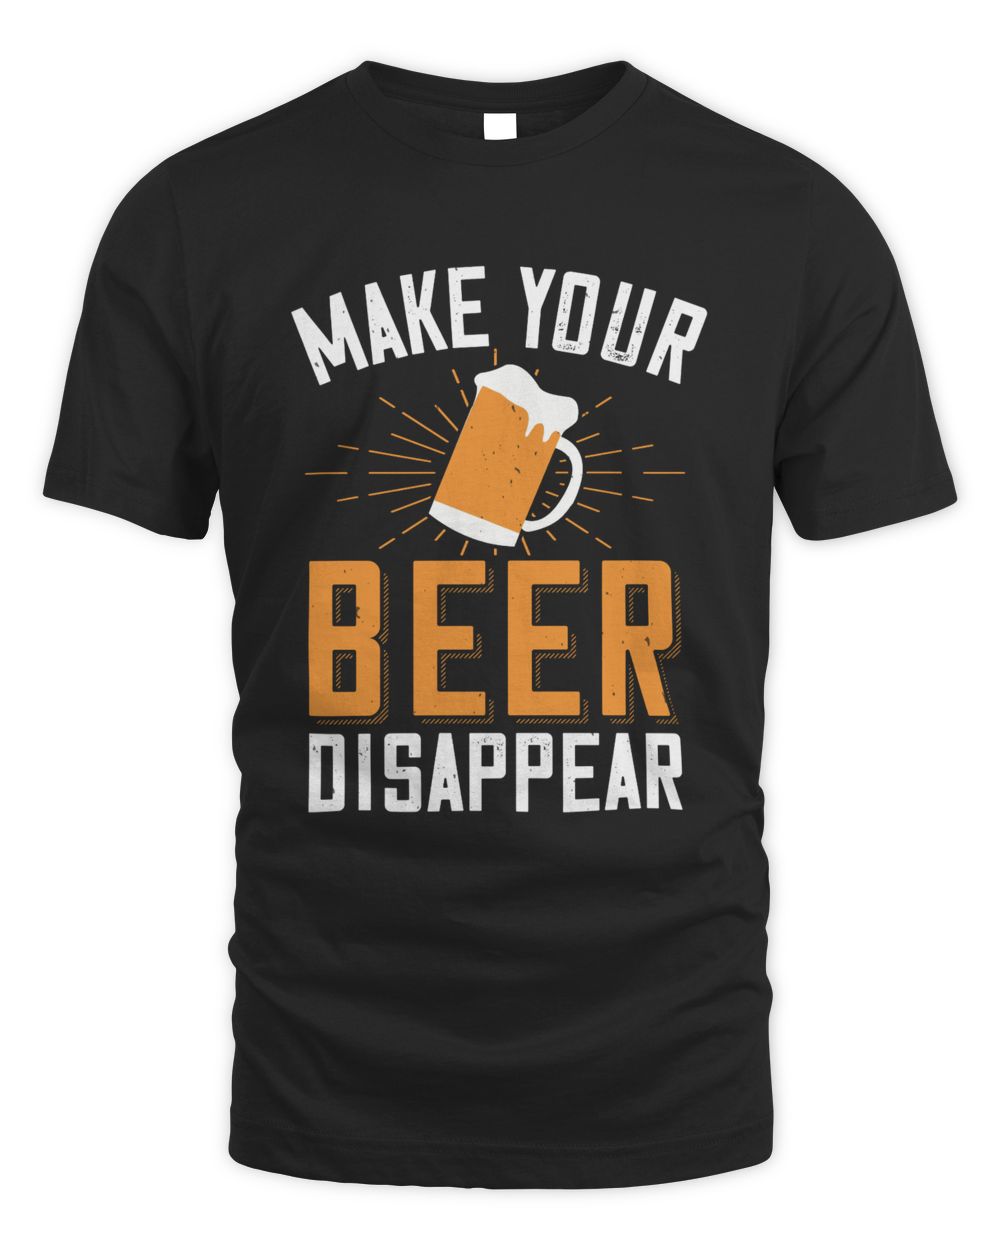 Make Your Beer Disappear Beer Shirt For Beer Lover With Free Shipping, Great Gift For Fathers Day Unisex Standard T-Shirt black 